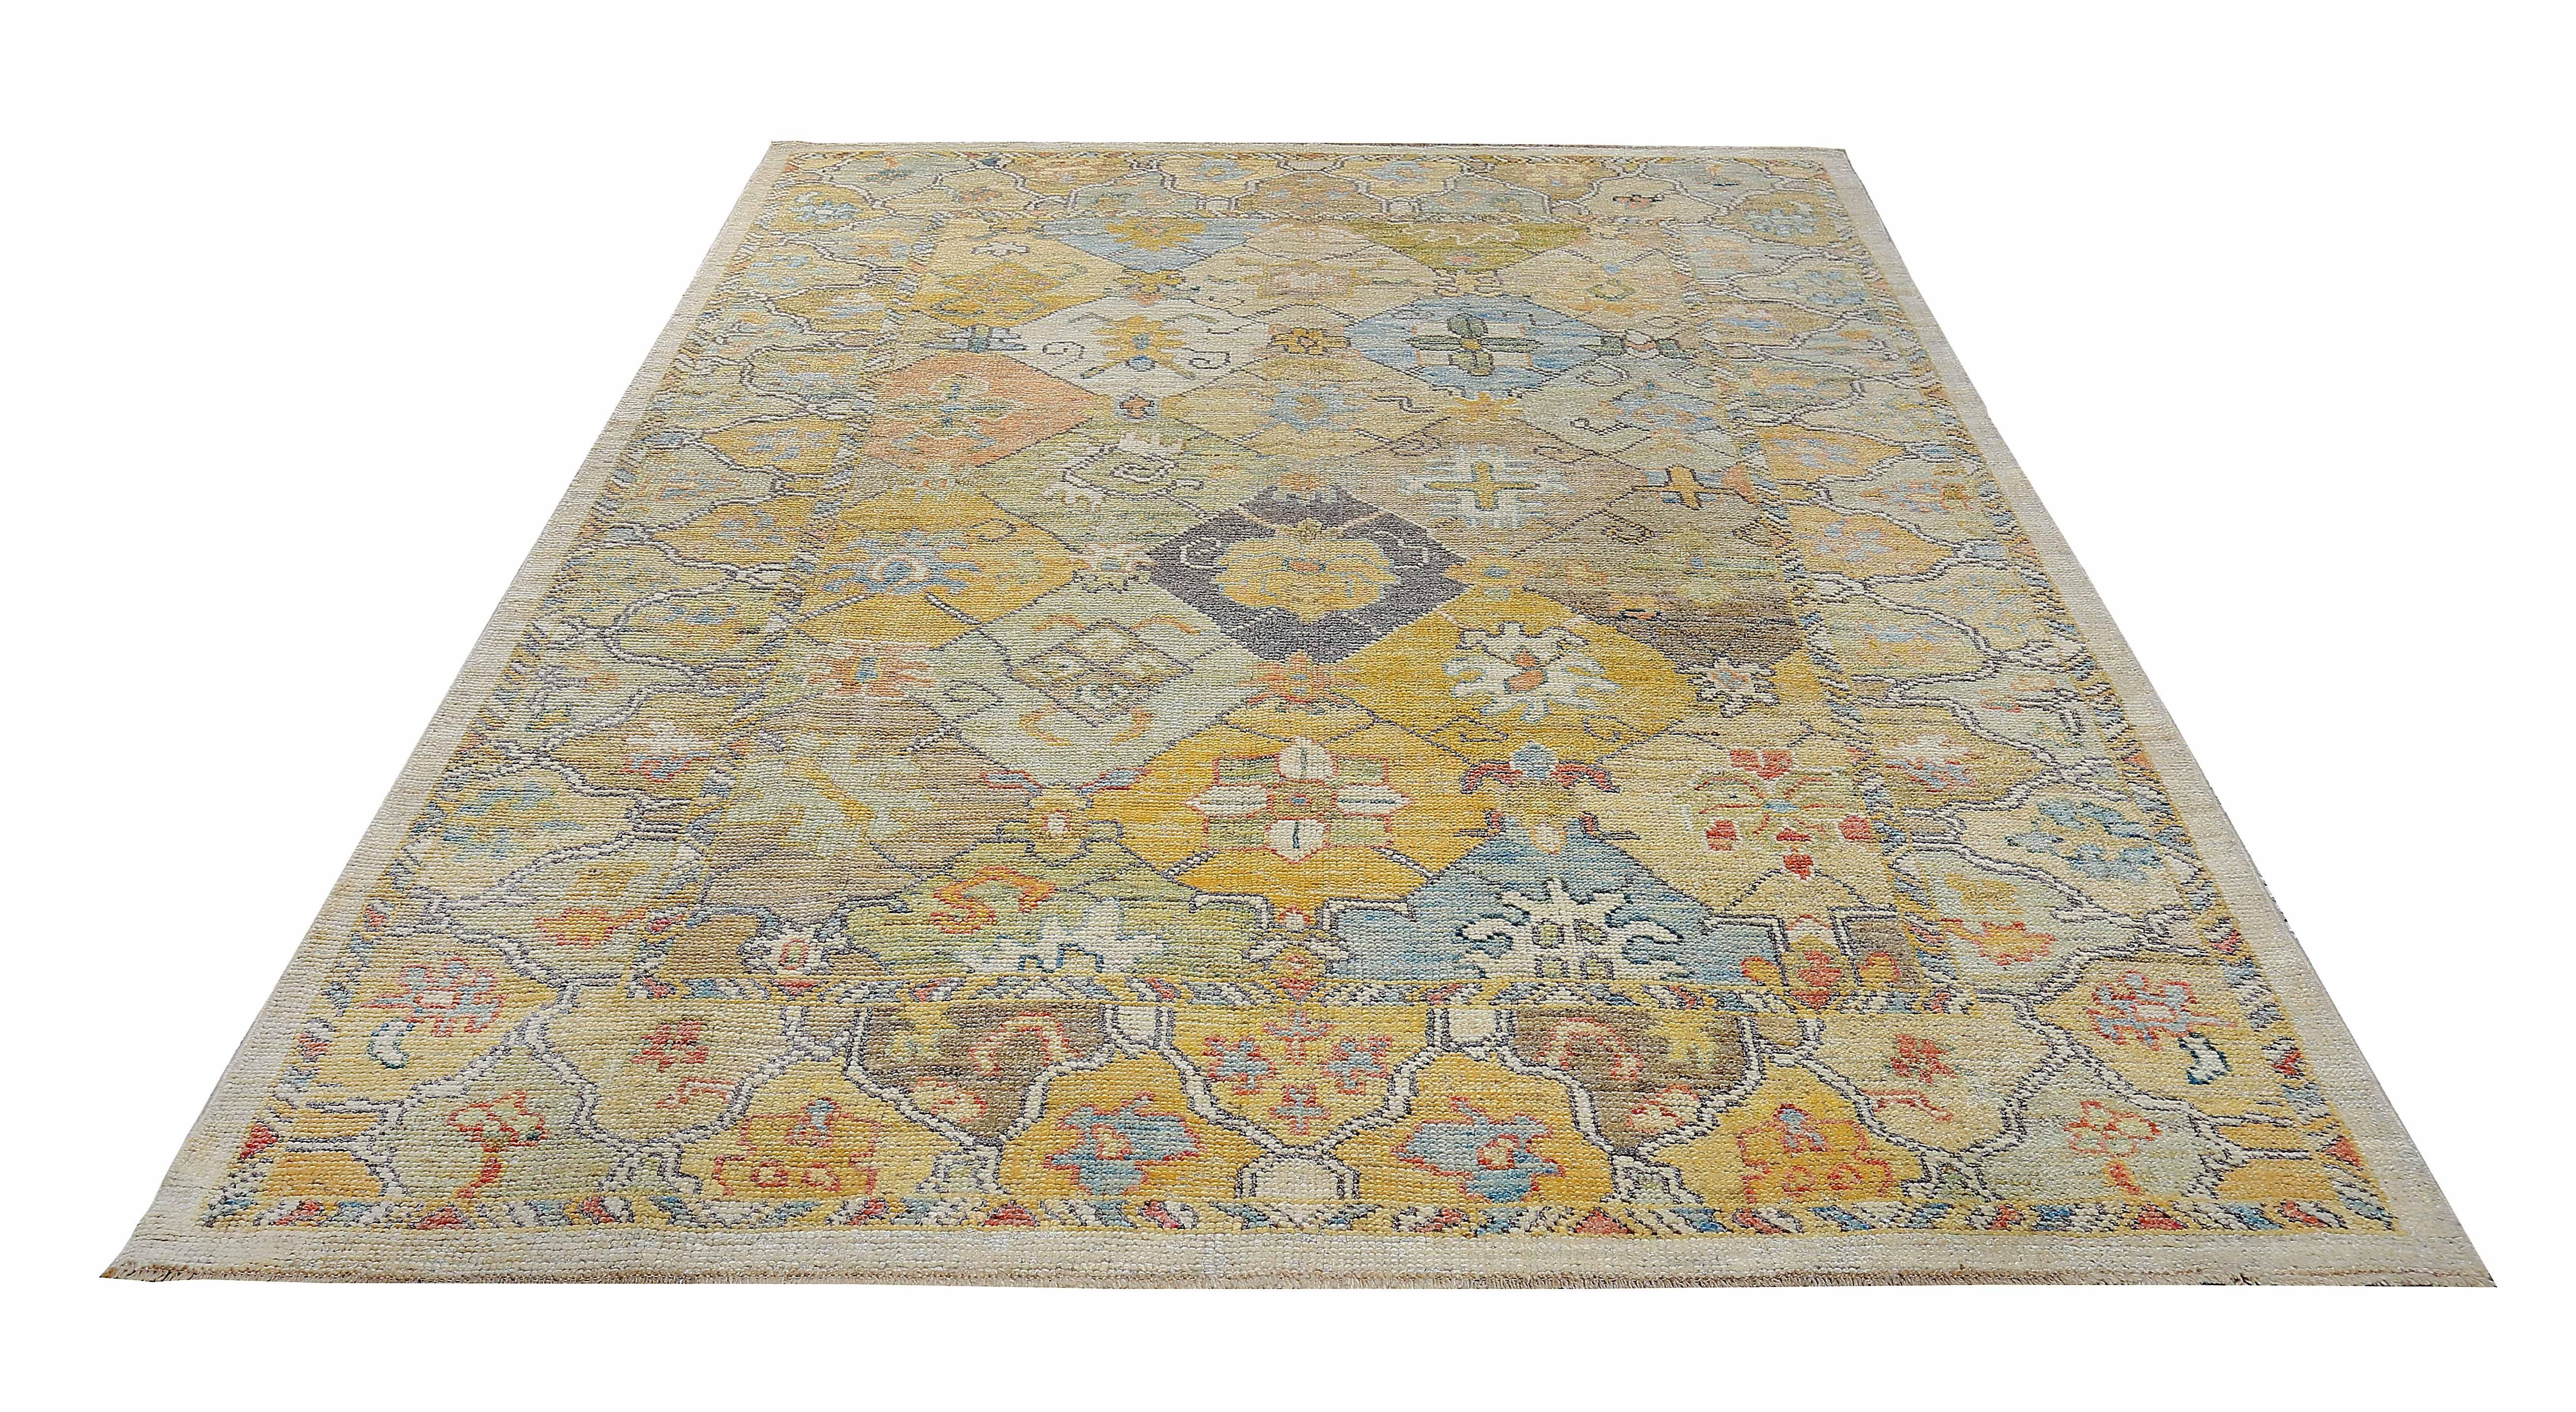 New Turkish rug made of handwoven sheep’s wool of the finest quality. It’s colored with organic vegetable dyes that are certified safe for humans and pets alike. It features blue and yellow floral details on an ivory field. Flower patterns are